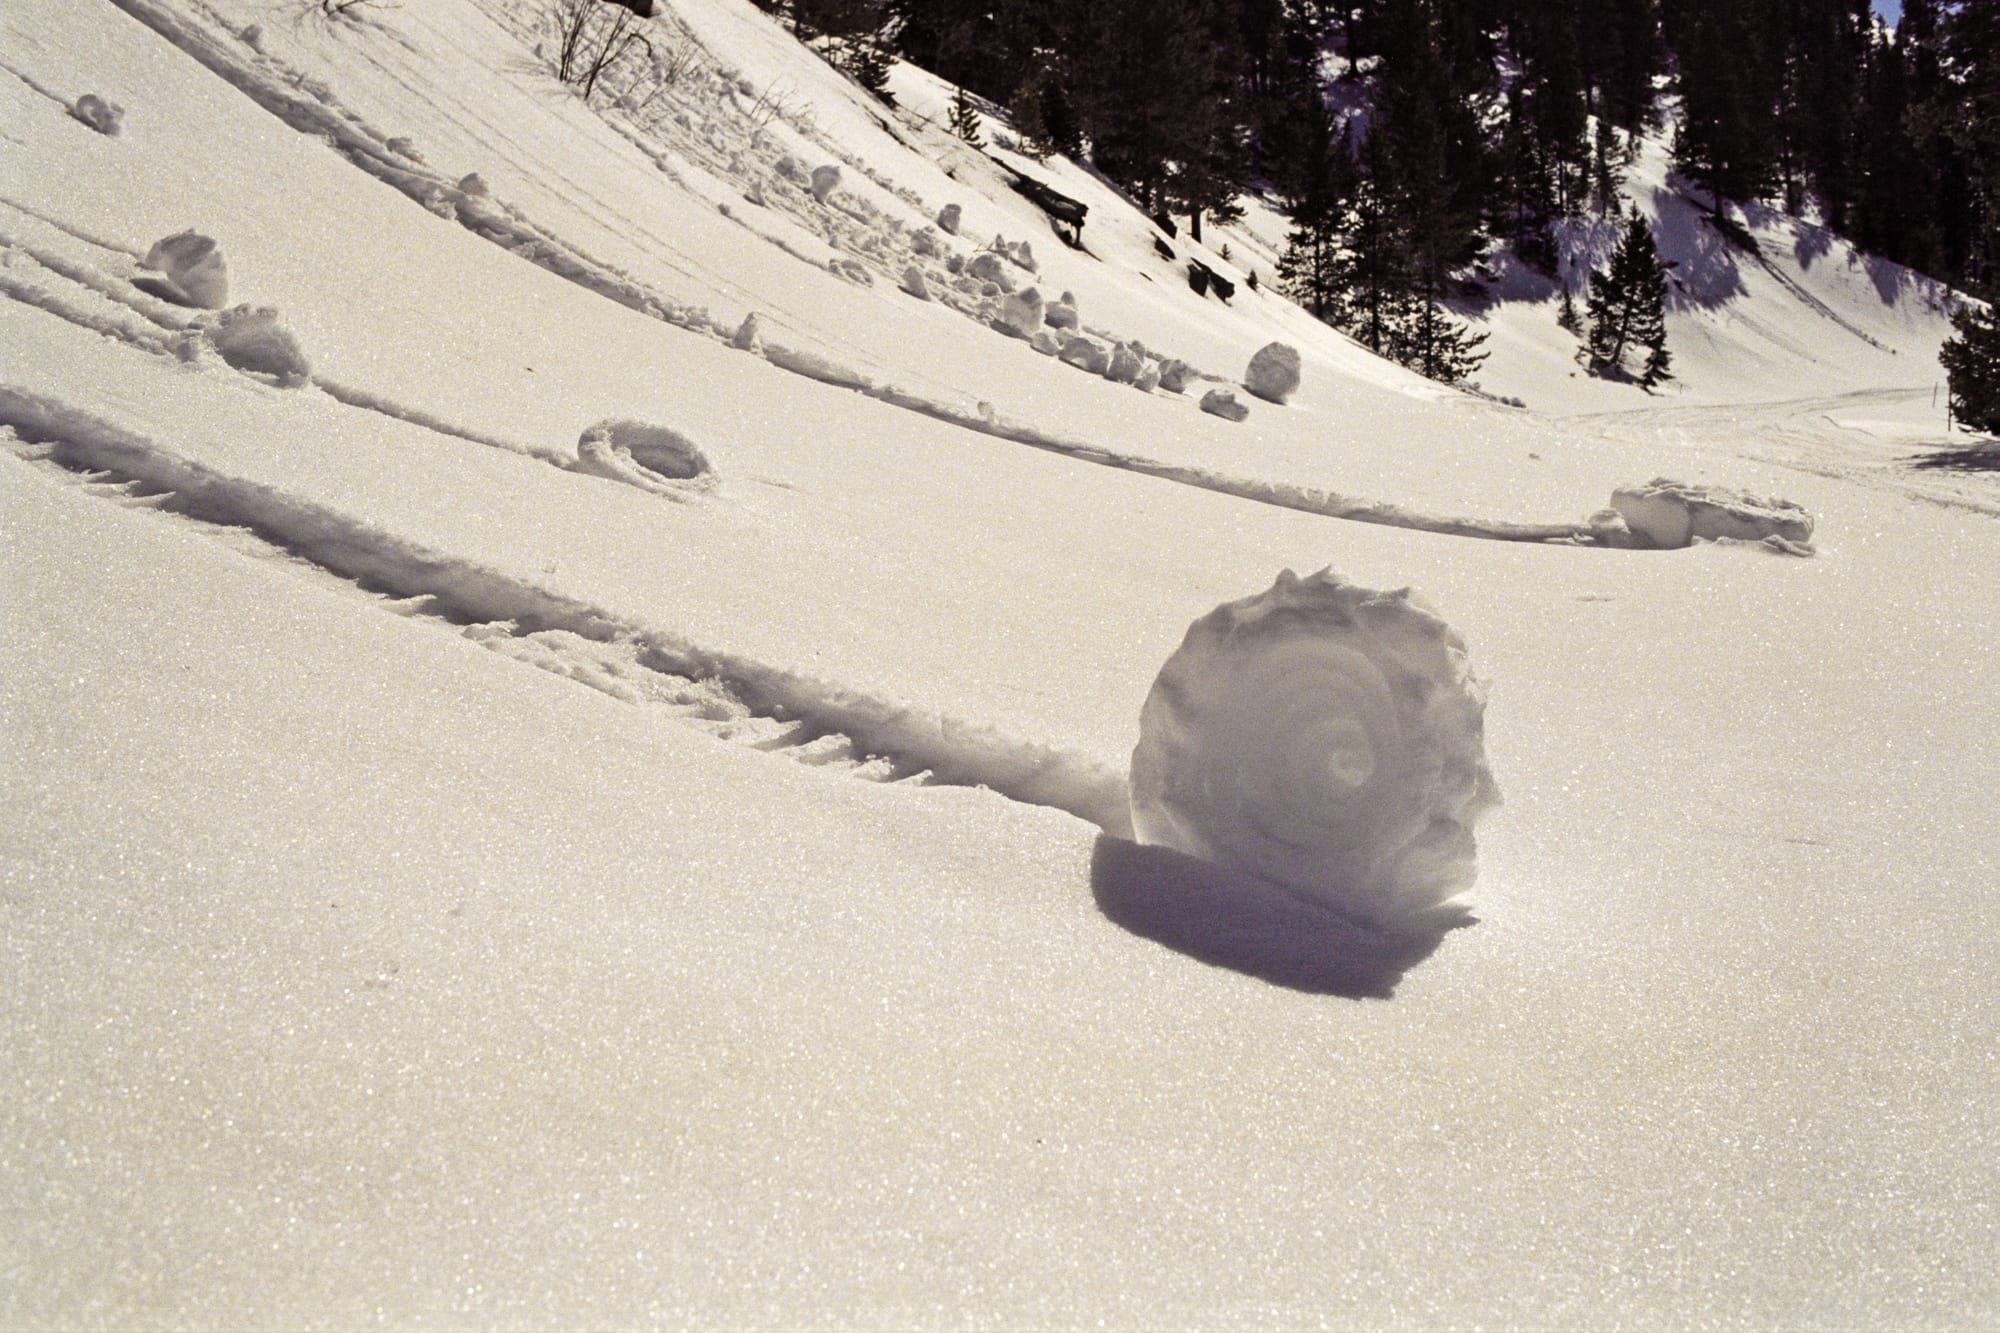 Fun Facts on Giant Self-Rolling Snow Balls